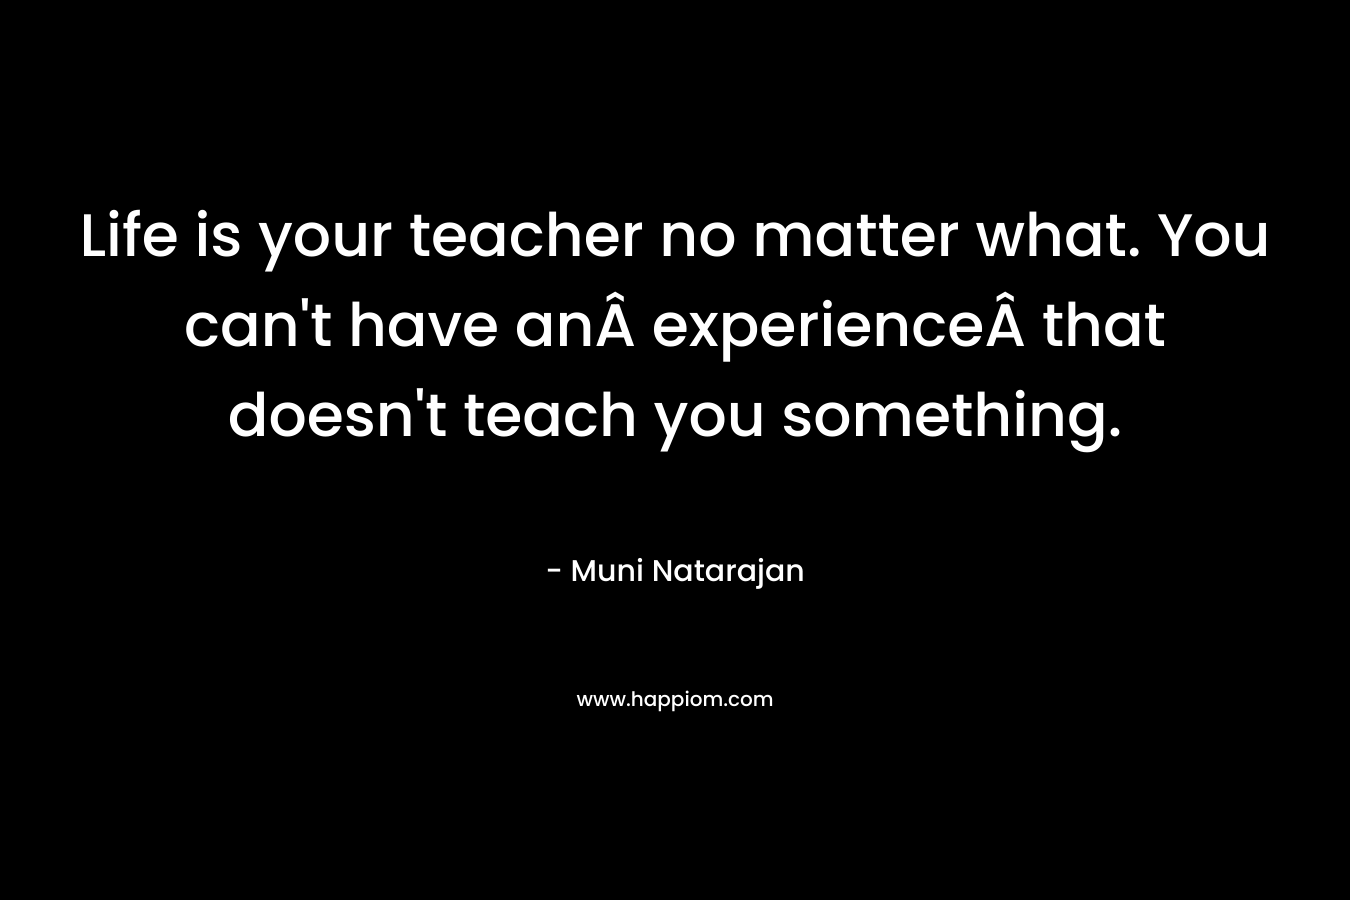 Life is your teacher no matter what. You can't have anÂ experienceÂ that doesn't teach you something.